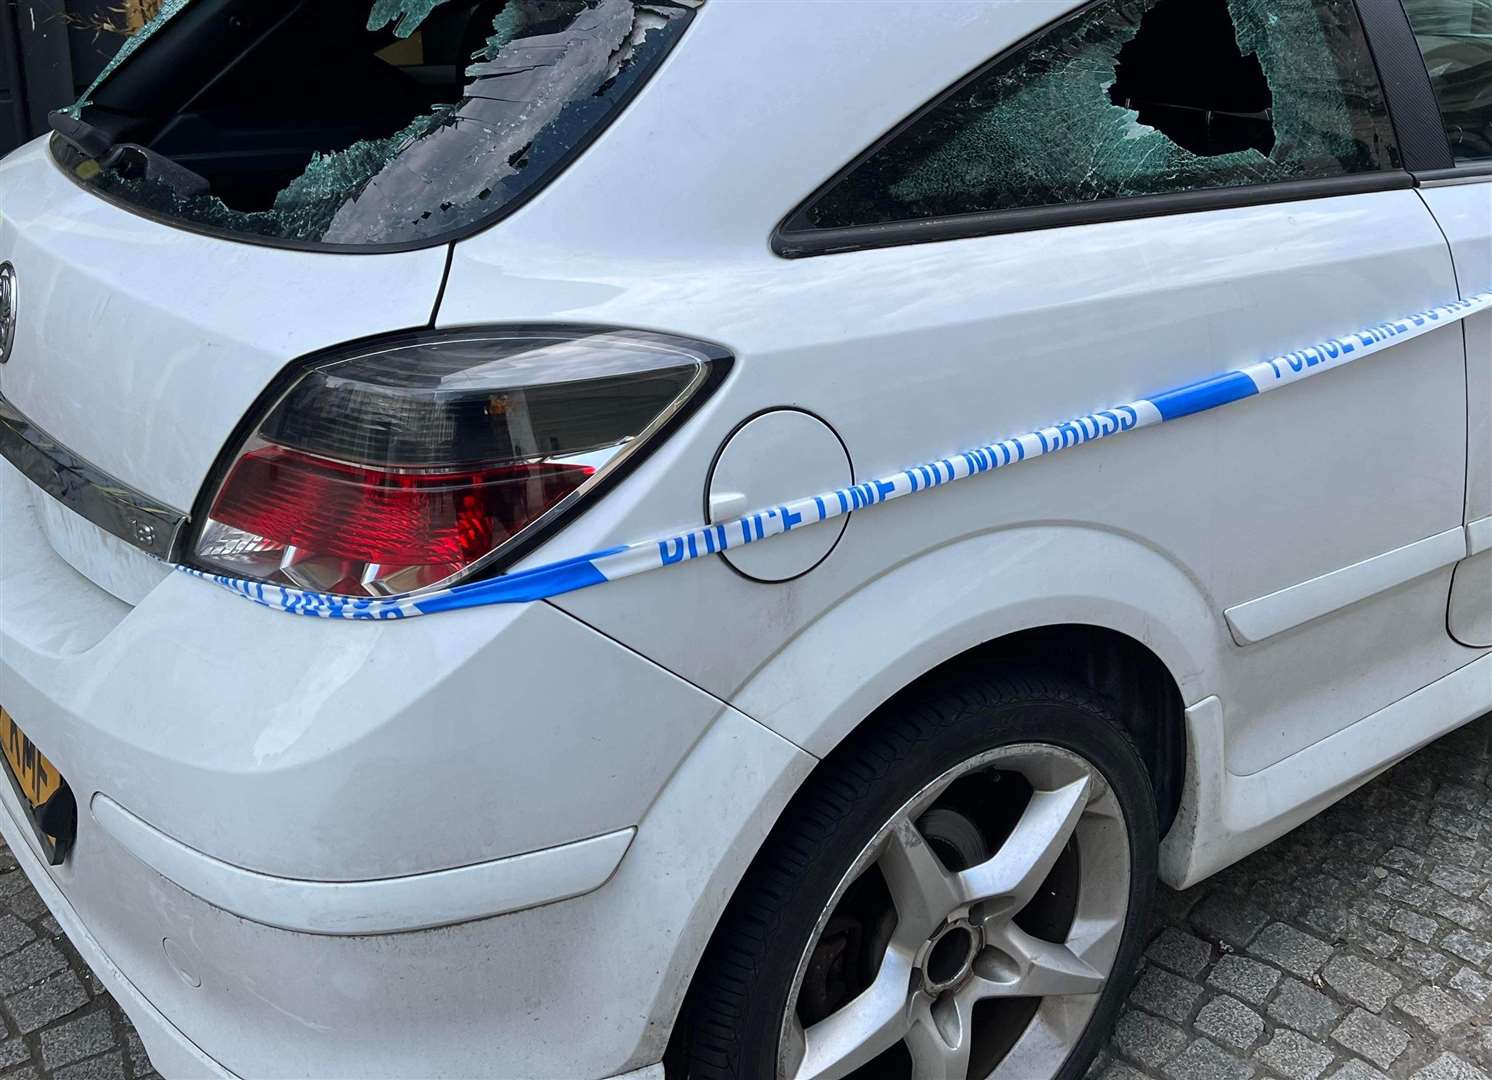 The white Vauxhall Astra was targeted in Folkestone town centre